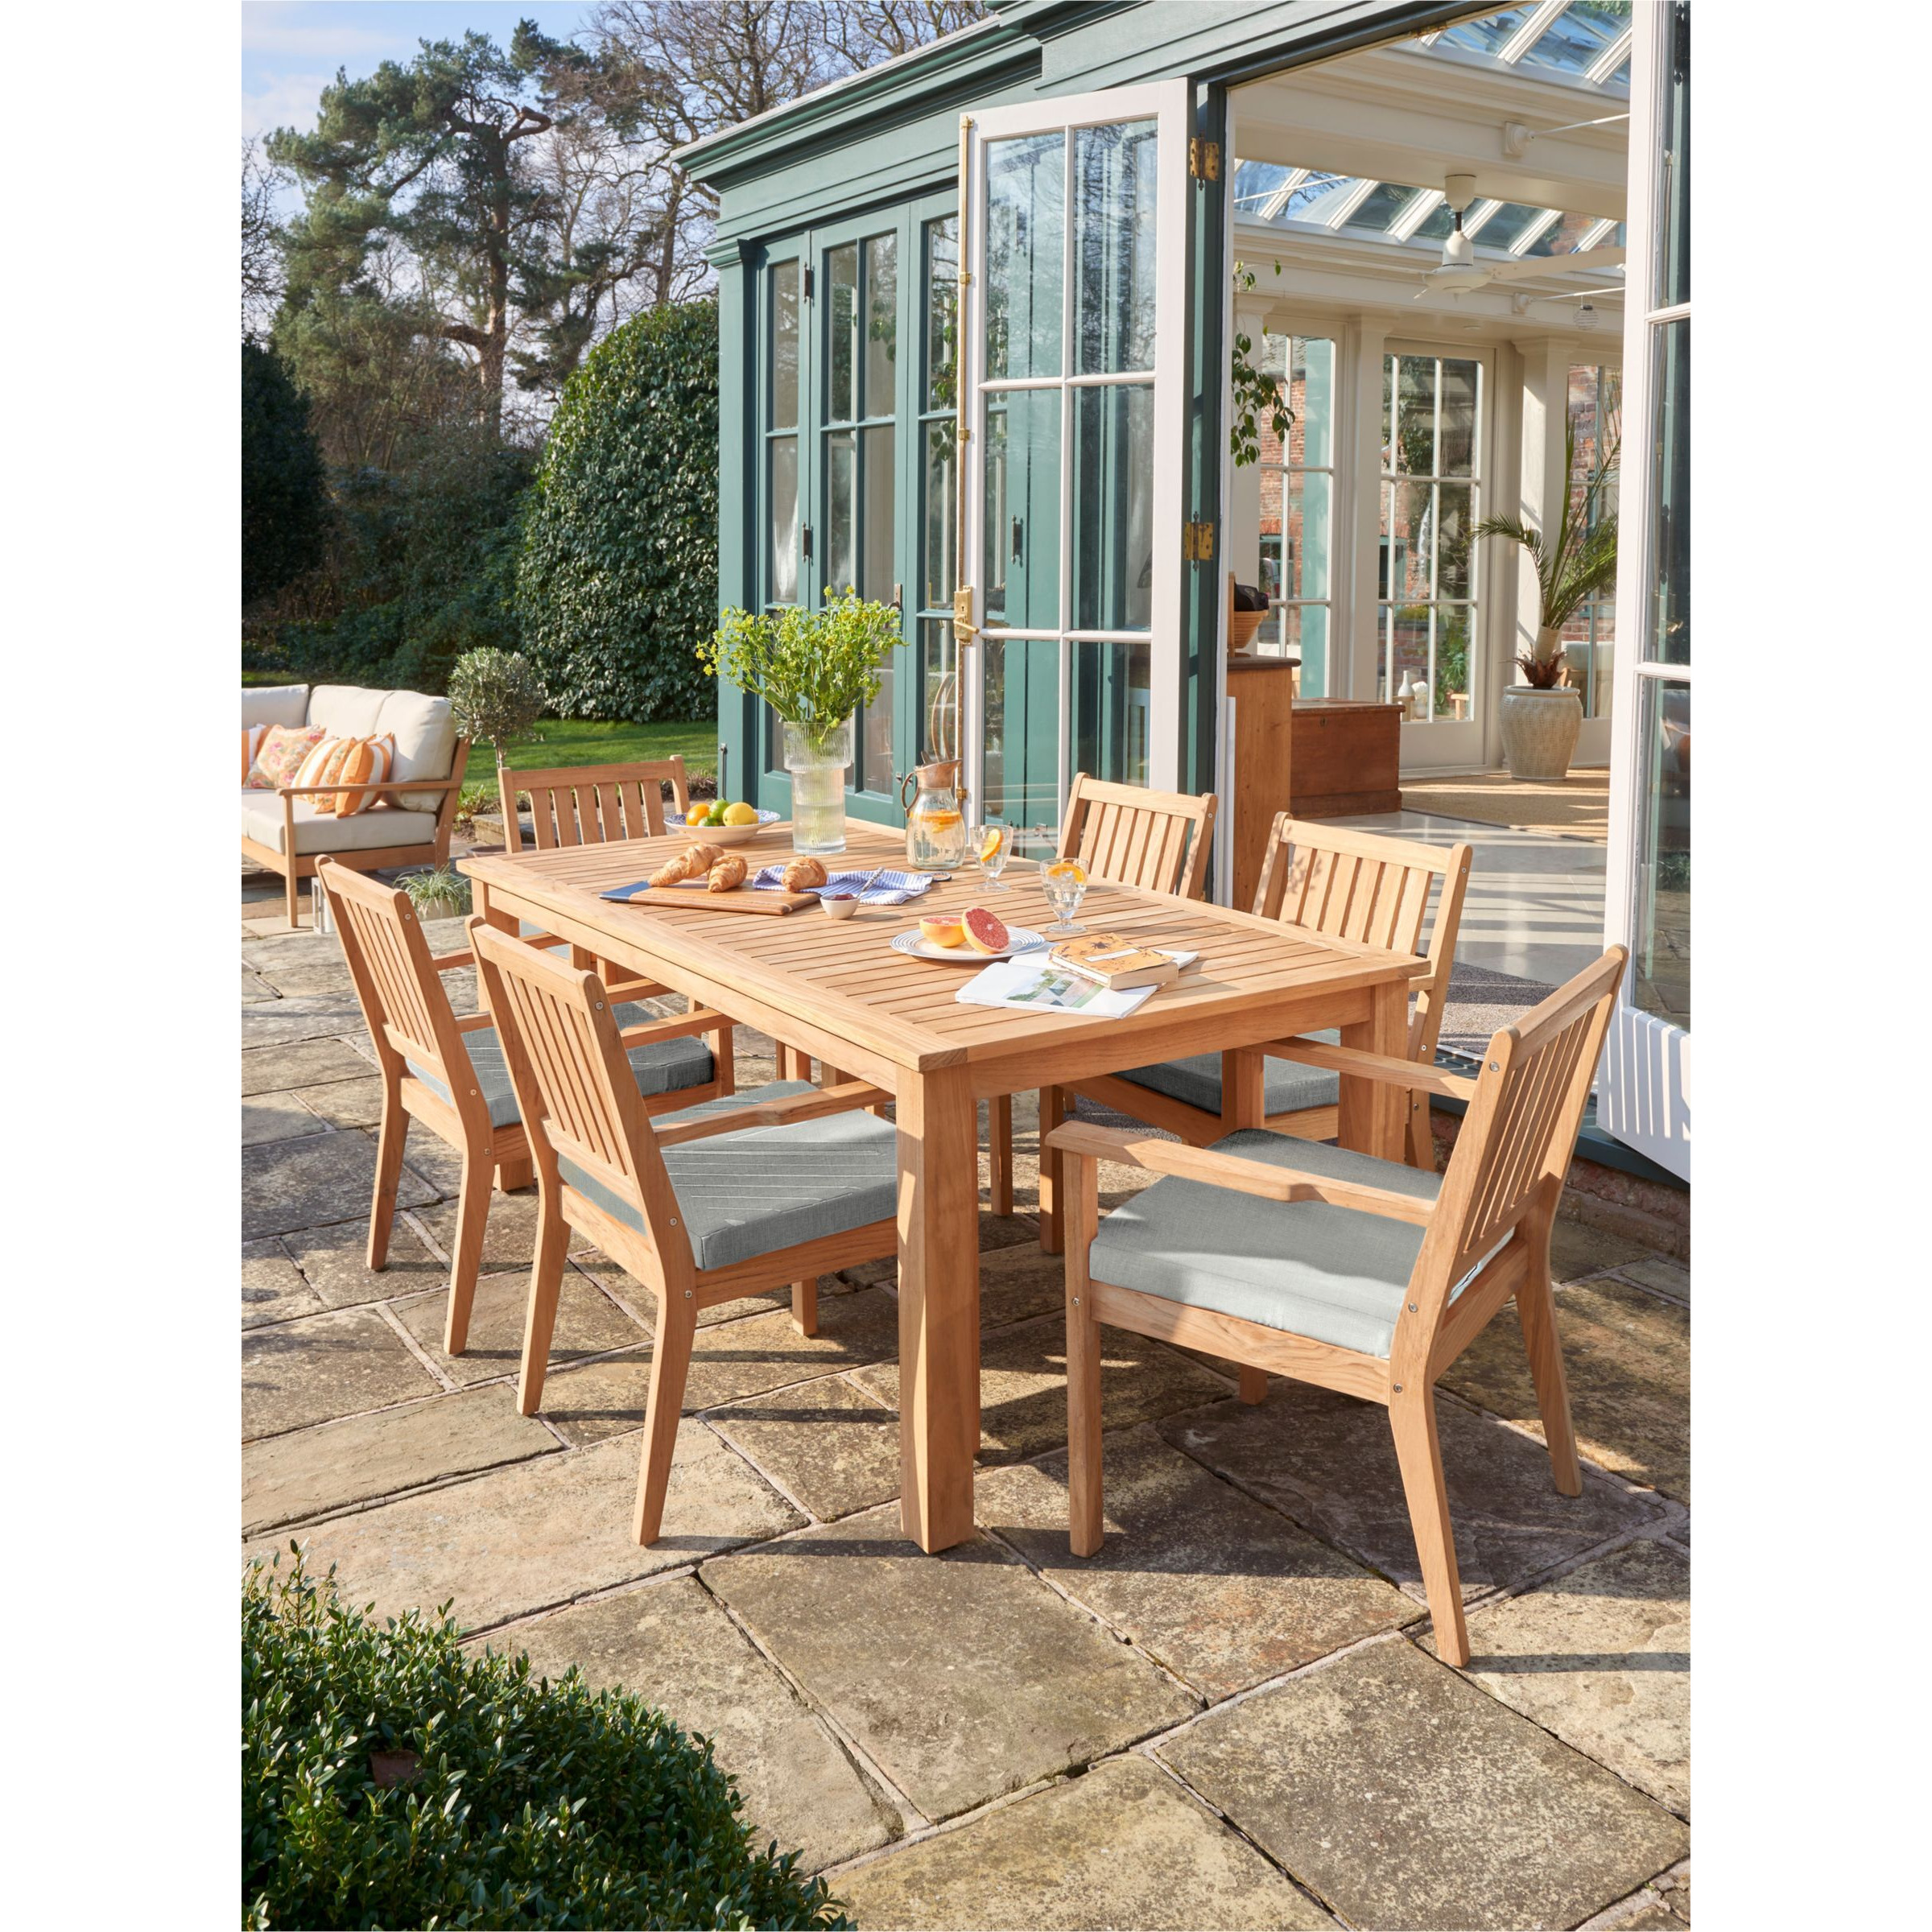 Laura Ashley Salcey 6-Seater Teak Wood Garden Dining Table & Chairs Set, Natural - image 1